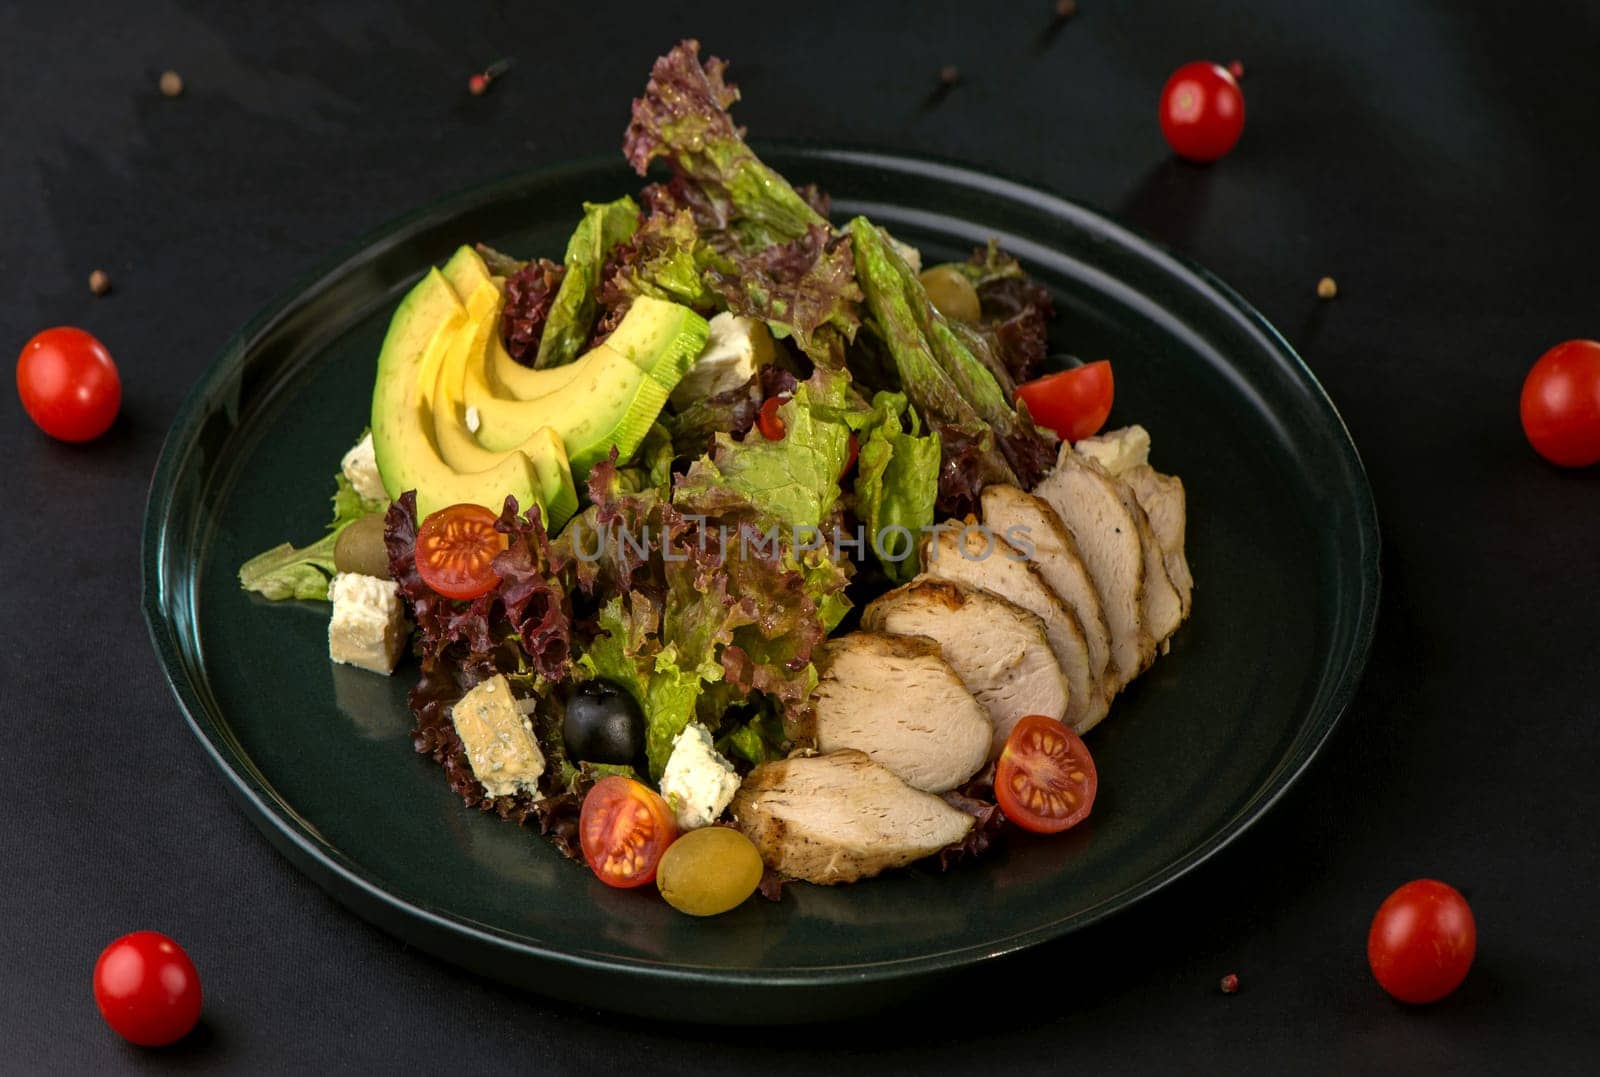 lettuce salad with chicken, avocado and tomatoes on a dark